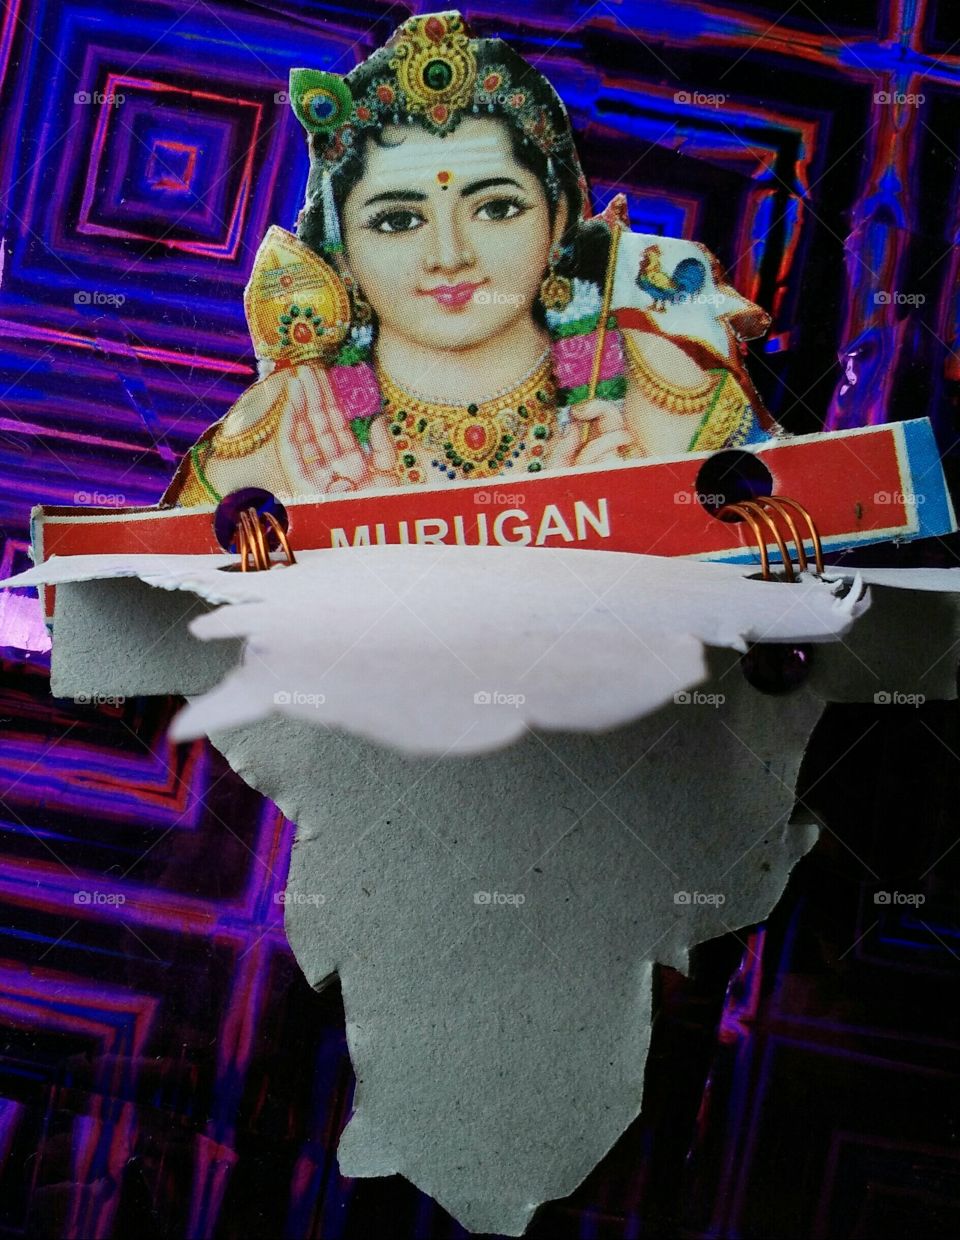 the famous face books of INDIAN GOD Murugan. it's the first book entire the worldwide on him and no one like this in the world.